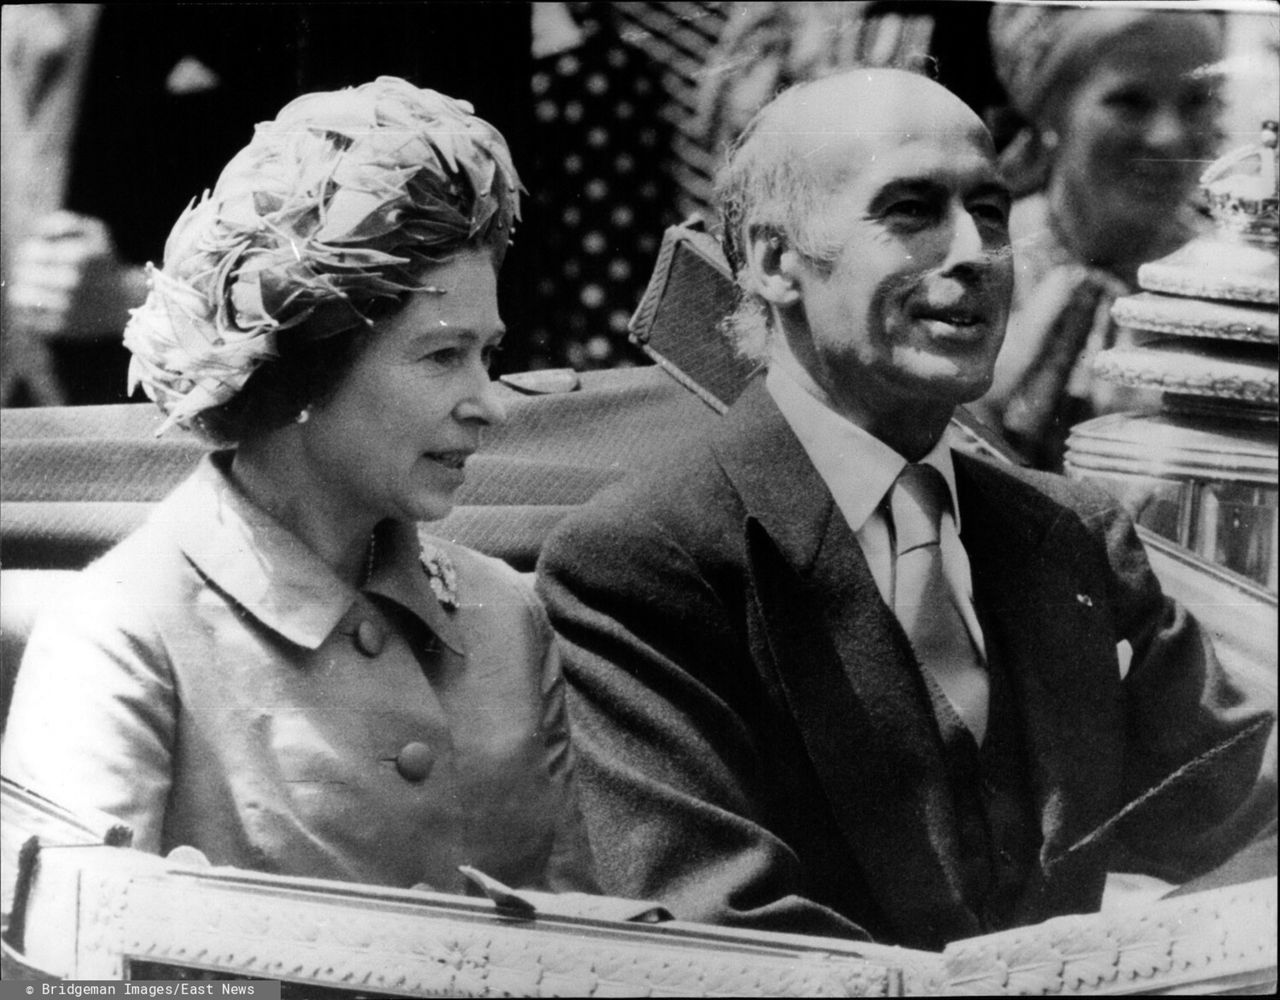 ZUM4903958 Jun. 22, 1976 - President Giscard D?'Estaing of France Arrives in Britain for a state visit: Photo shows The Queen elisabeth II accompanied by President Giscard D?'Estaing leaving Victoria station in an open carriage on their way to Buckingham Palace today by .; (add.info.: Jun. 22, 1976 - President Giscard D?'Estaing of France Arrives in Britain for a state visit: Photo shows The Queen elisabeth II accompanied by President Giscard D?'Estaing leaving Victoria station in an open carriage on their way to Buckingham Palace today); Photo ?? Keystone/Zuma; .